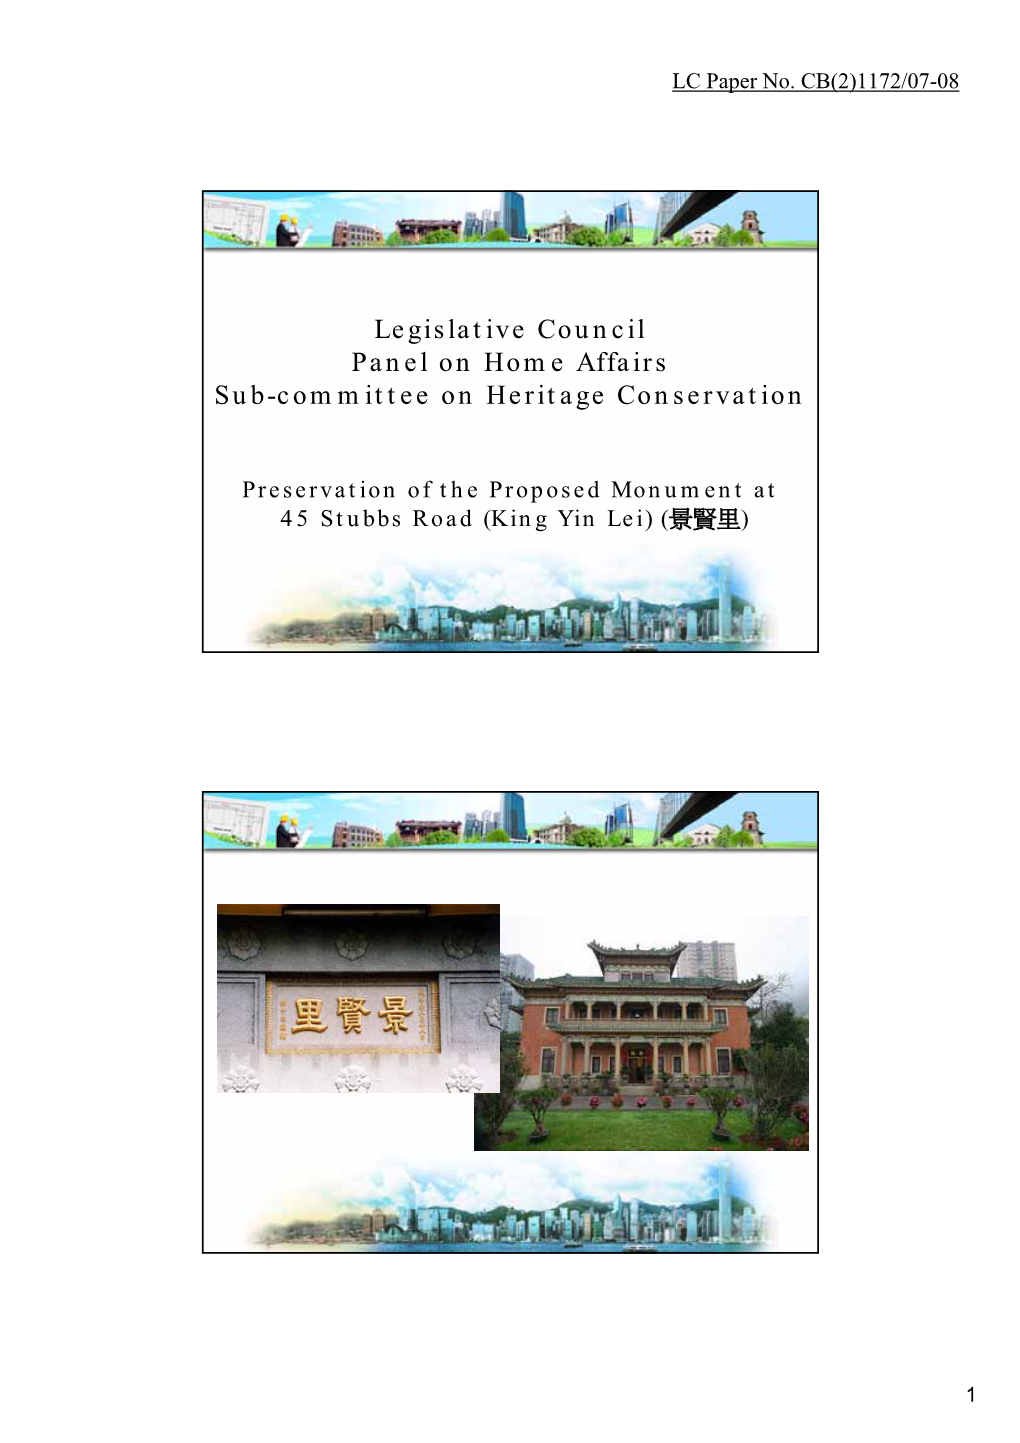 Legislative Council Panel on Home Affairs Sub-Committee on Heritage Conservation